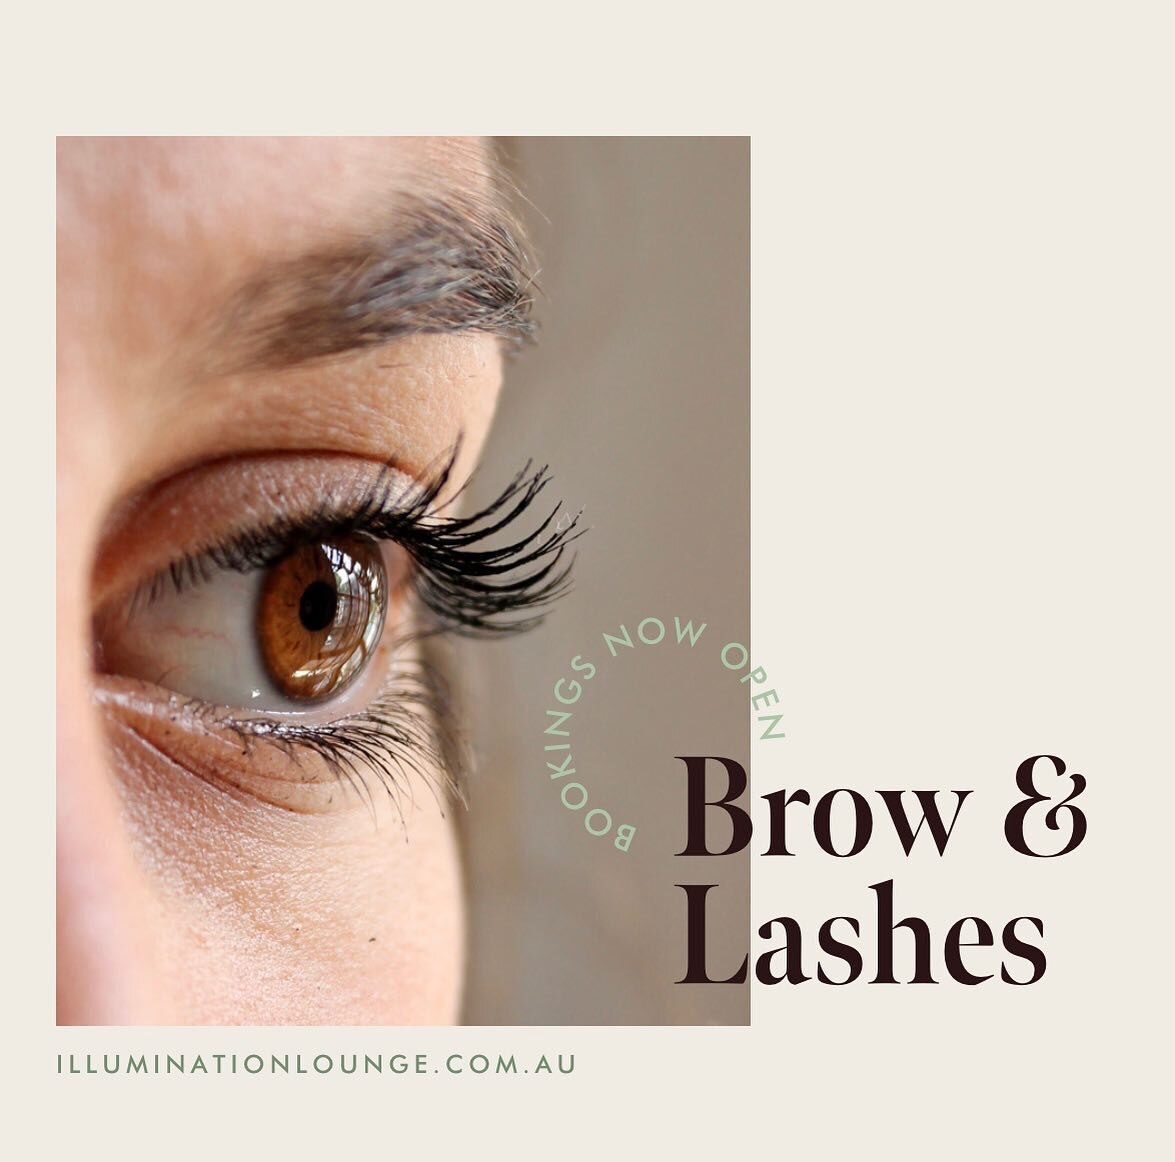 Our bookings are now open for brows and lashes . We can&rsquo;t wait to welcome you in our sanctuary!
Click on bio for bookings 💚❤️ #melbournebrowspecialist #melbournelashlift #melbournebrowlamination #mooneeponds #mooneeponds3039 #essendonbeauty #e